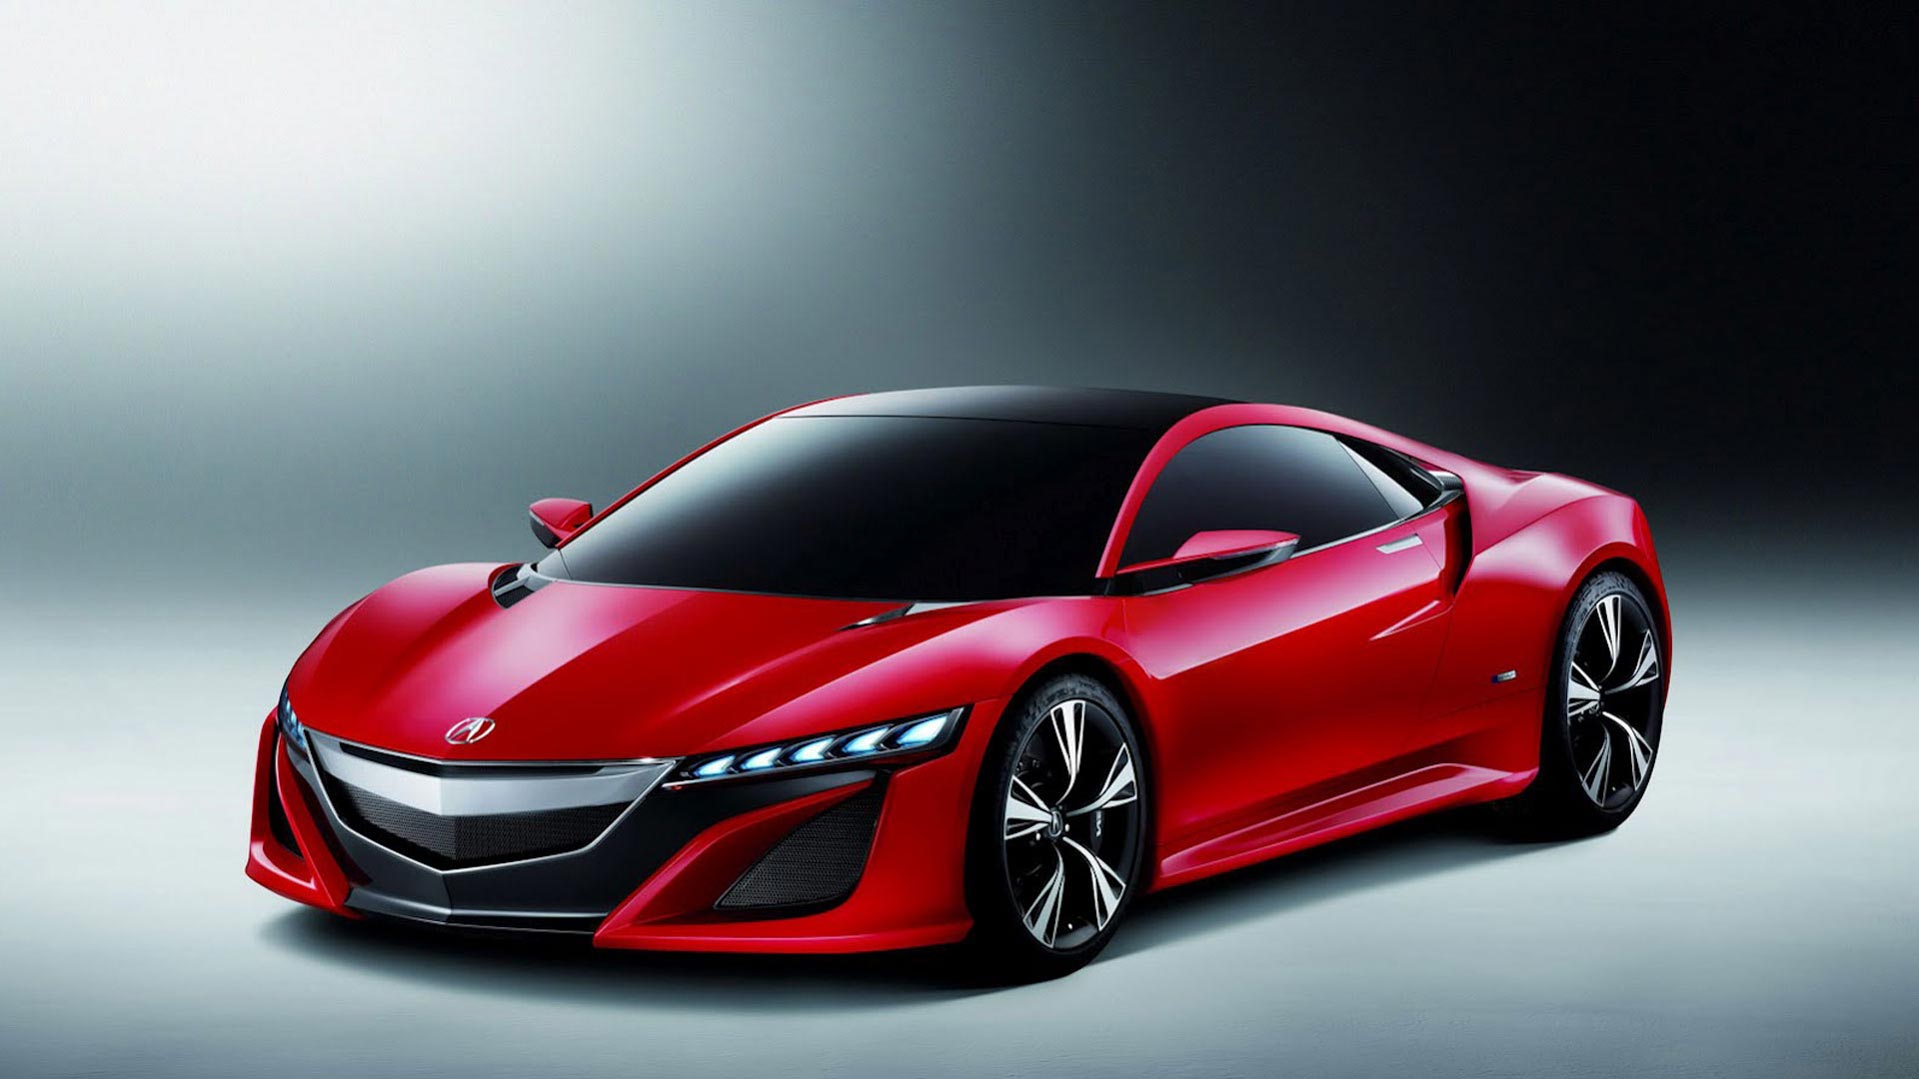 Free Download 2016 Acura Nsx Hd Wallpapers Download 1919x1079 For Your Desktop Mobile Tablet Explore 45 Acura Nsx Wallpaper Hd Acura Logo Wallpaper Nsx Wallpaper High Resolution Honda Nsx Wallpaper